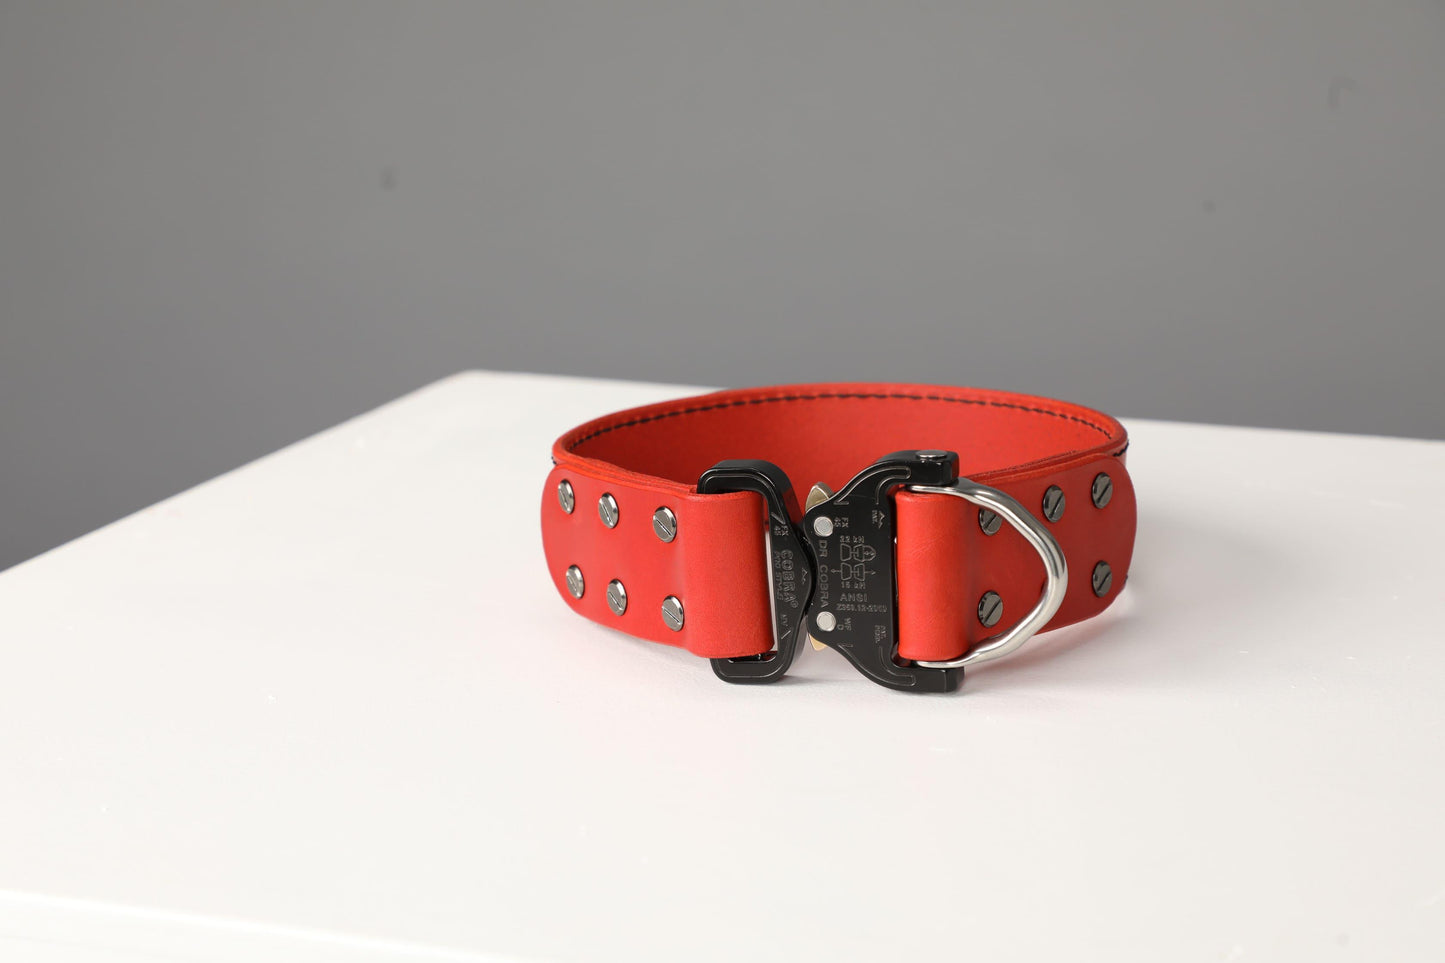 Red leather dog collar with COBRA® buckle - premium dog goods handmade in Europe by My Wild Other